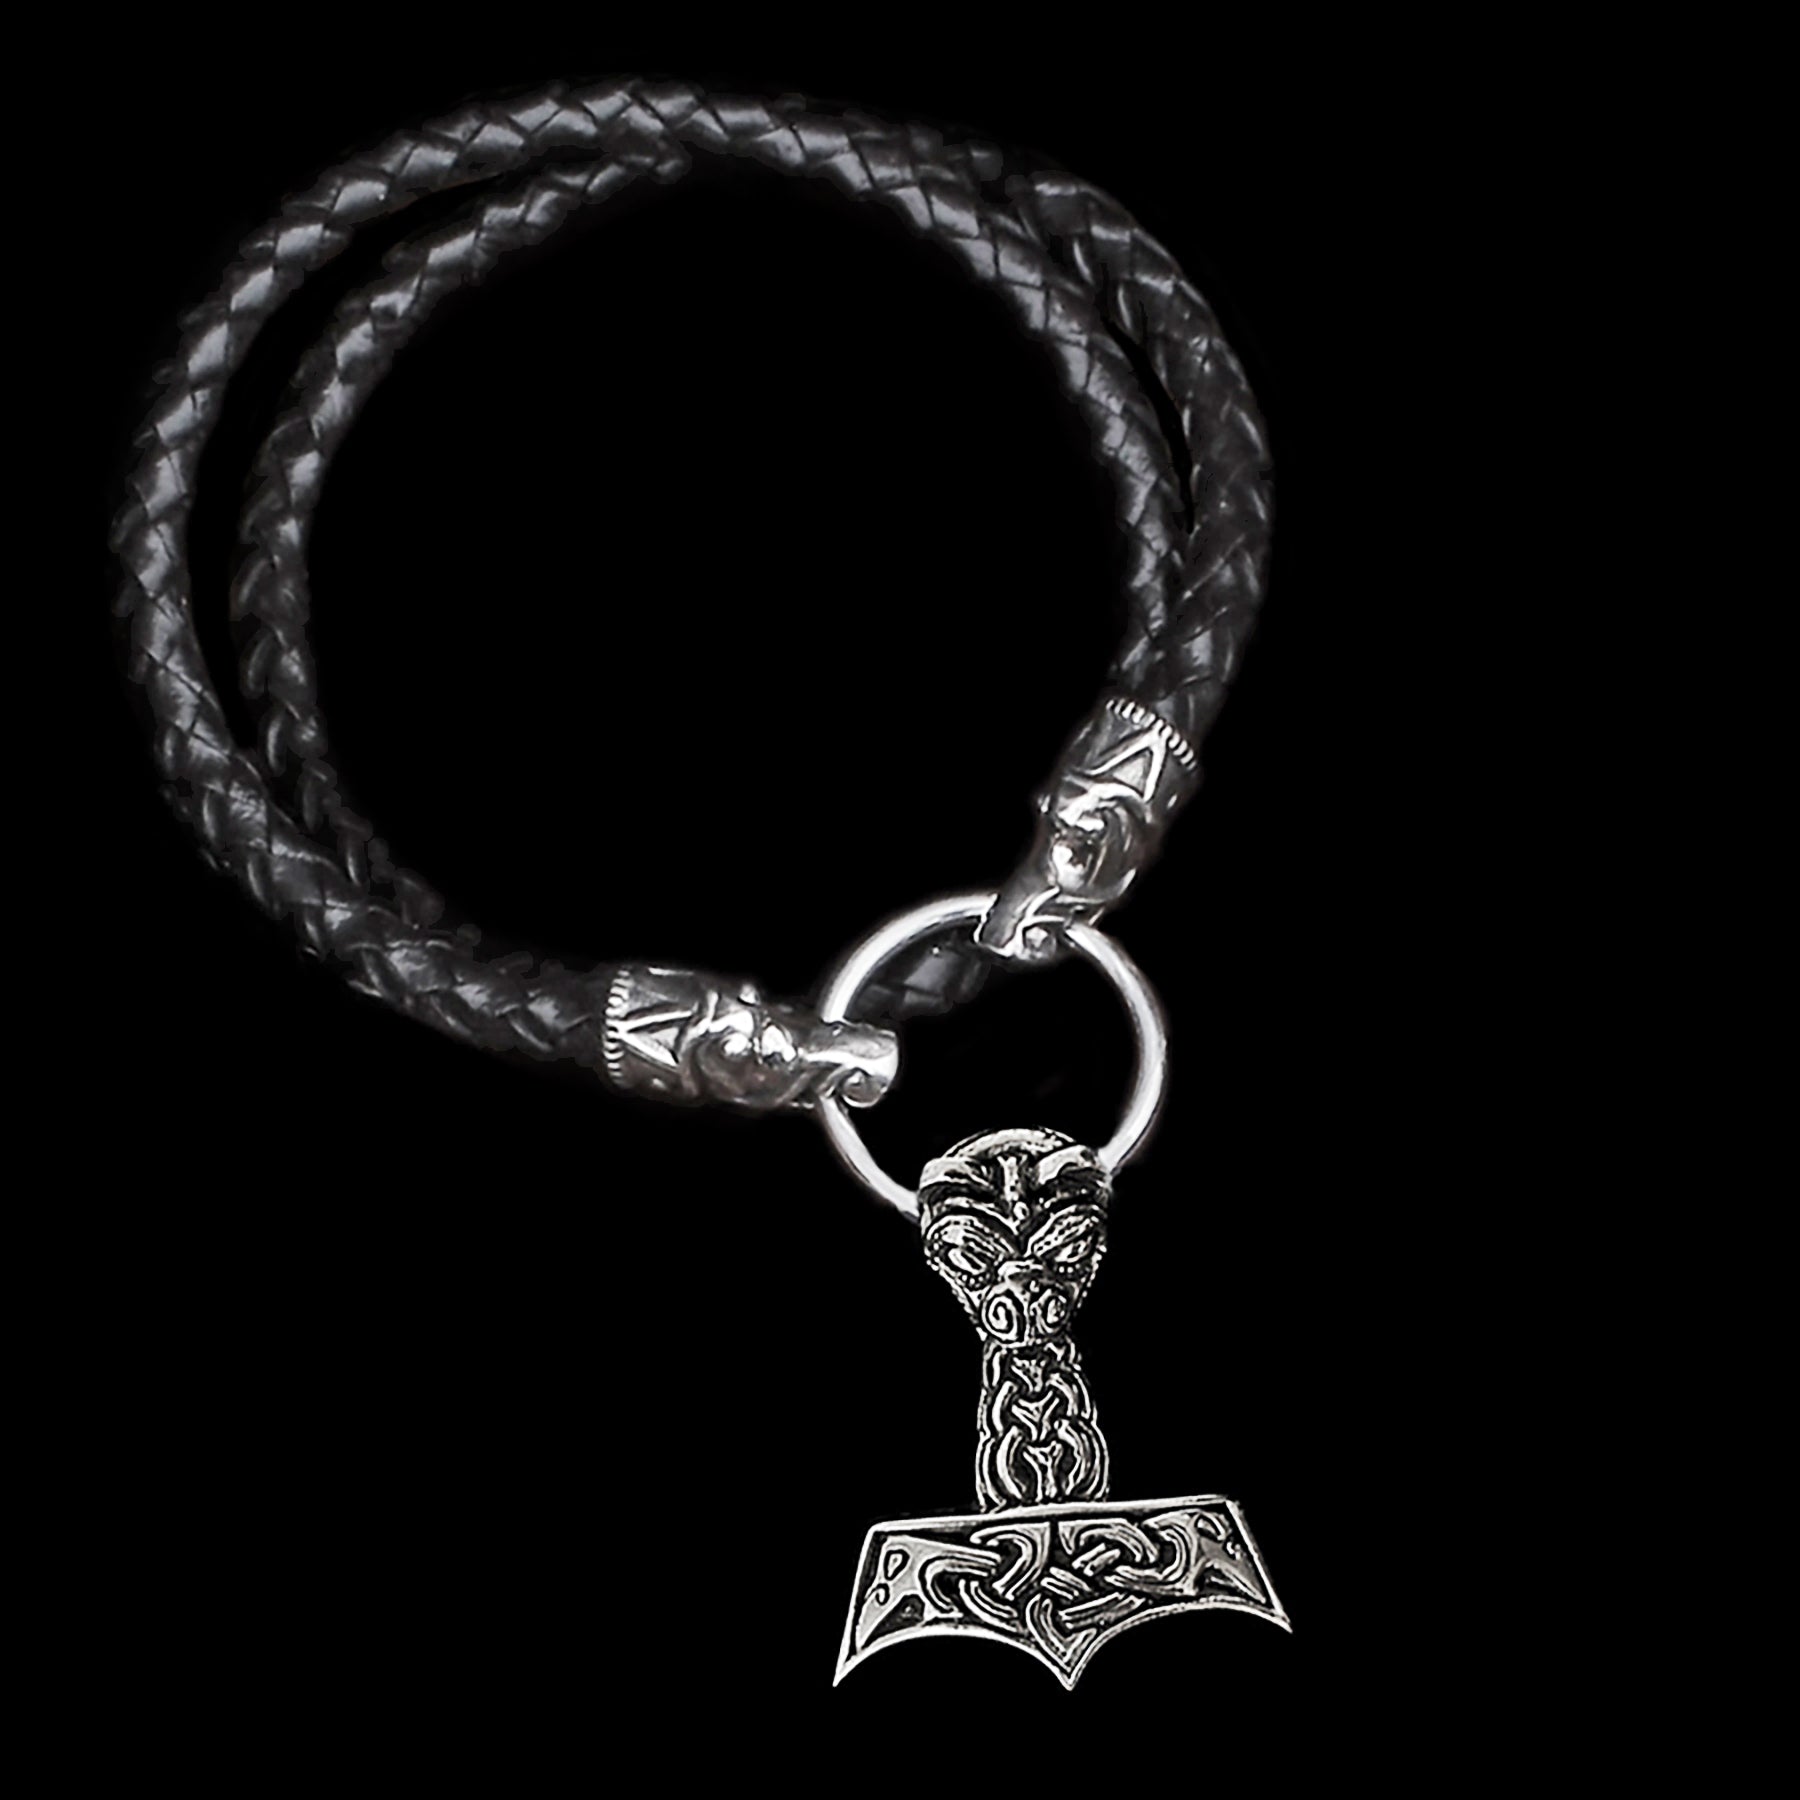 8mm Braided Leather Viking Necklace with Silver Gotland Dragon Heads, Split Ring and Silver Large Ferocious Thors Hammer